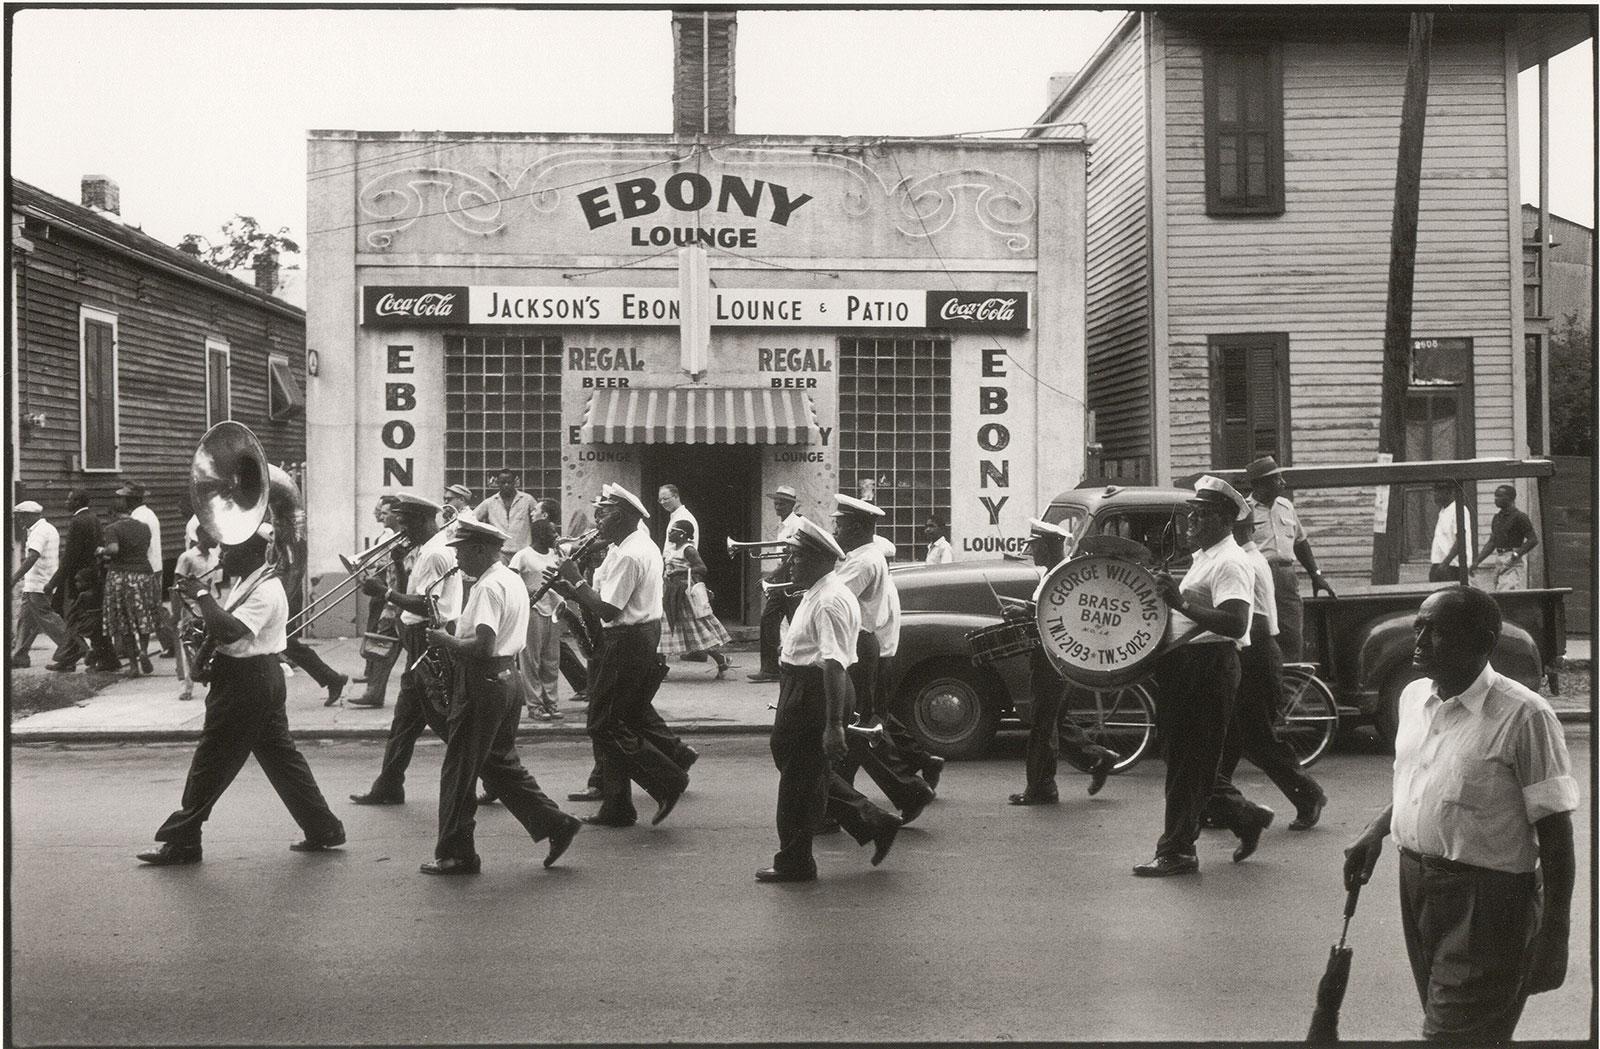 William Claxton Figurative Photograph - George Williams Brass Band, New Orleans (Ebony Lounge)